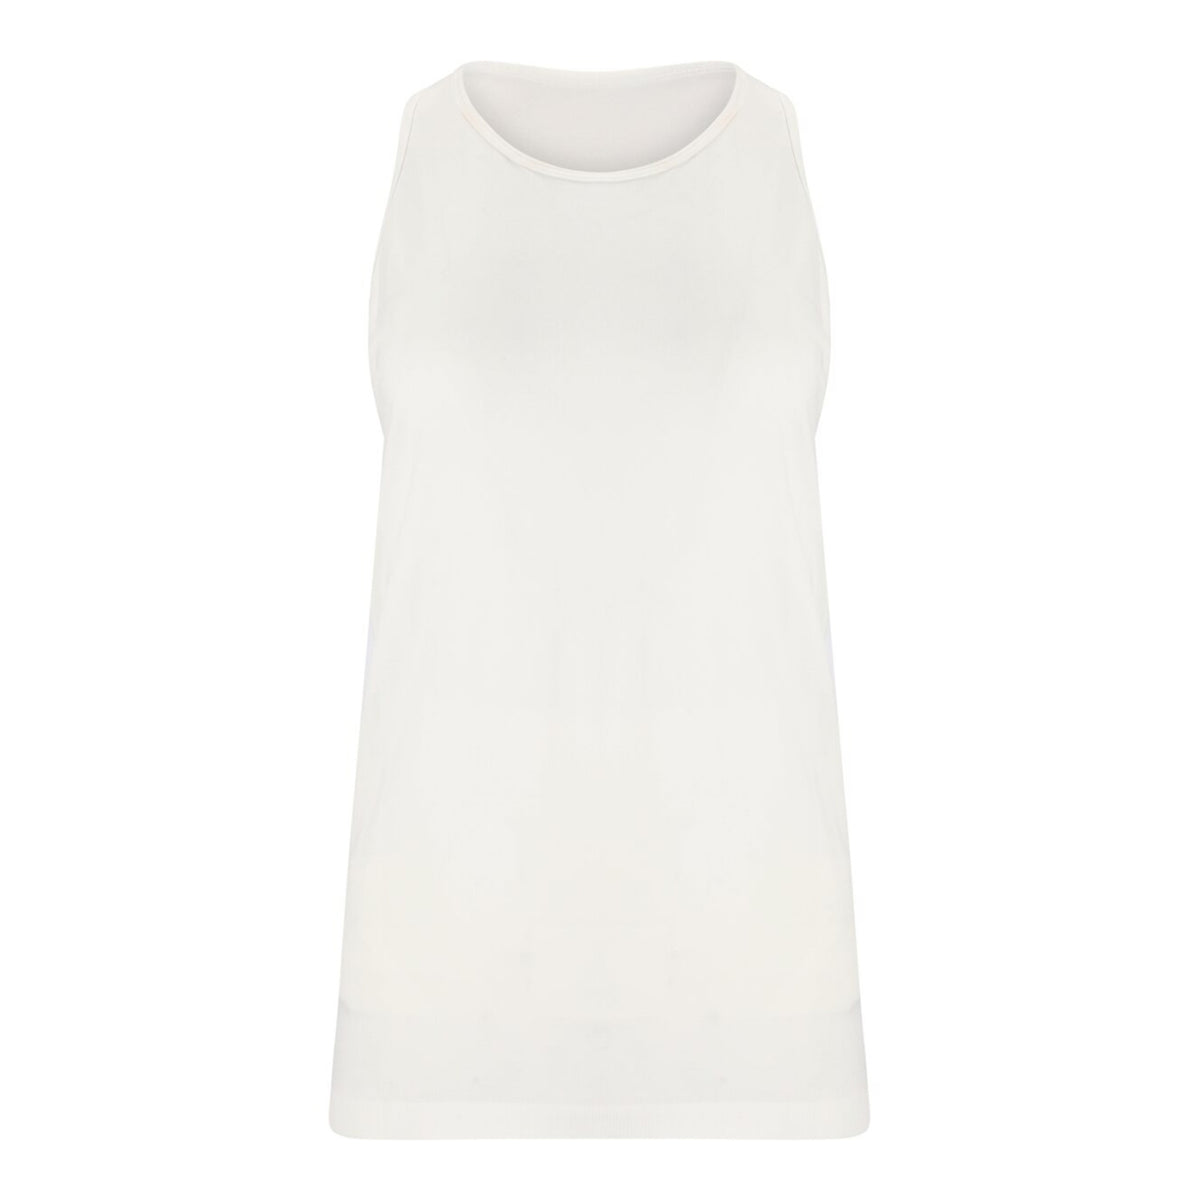 Athlecia Julee Womens Seamless Vest Top: White